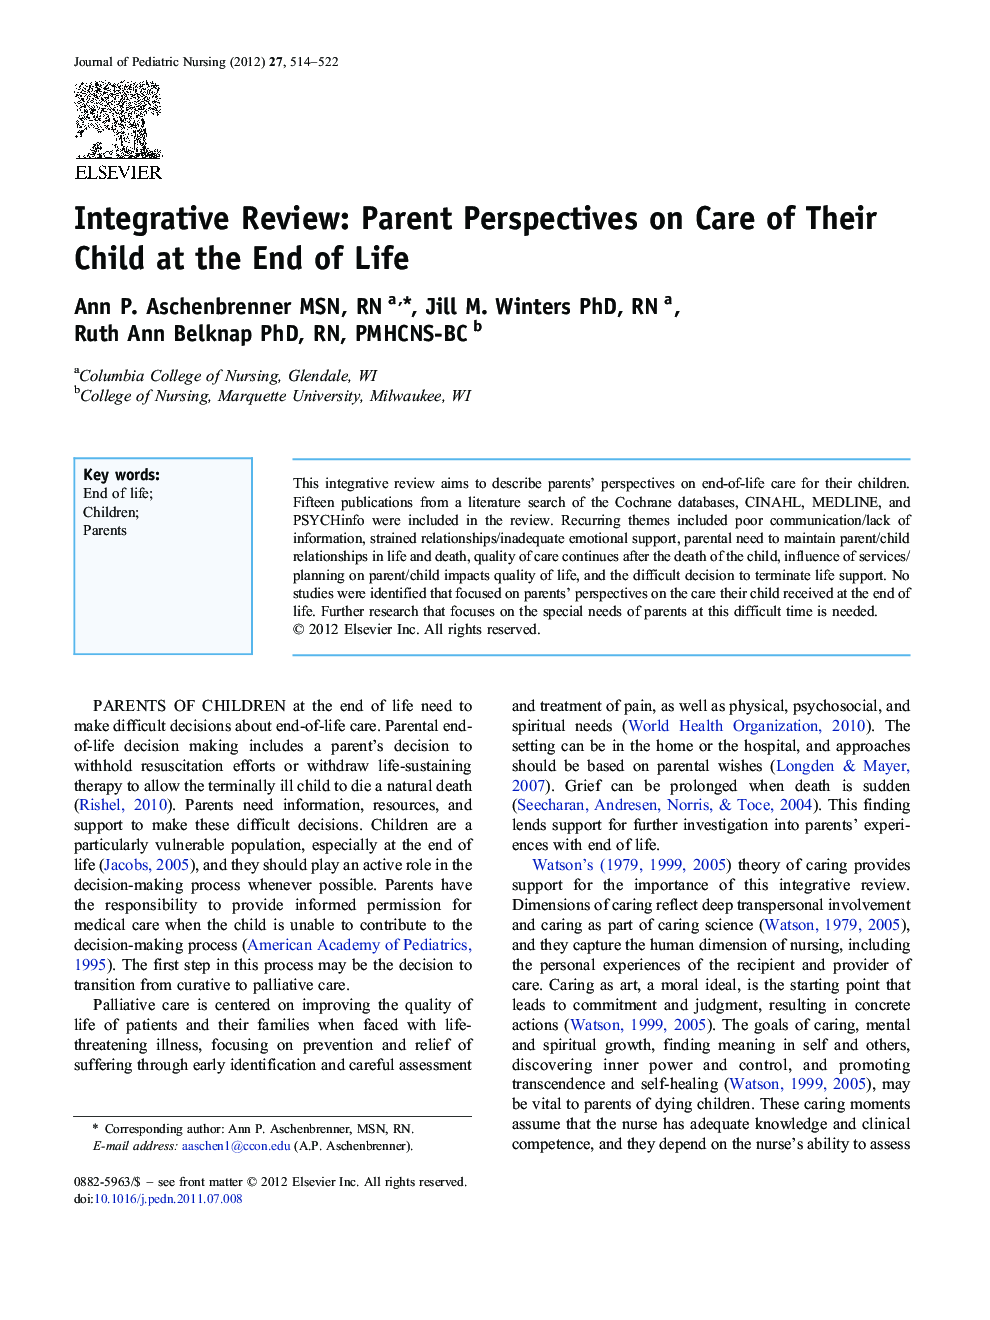 Integrative Review: Parent Perspectives on Care of Their Child at the End of Life